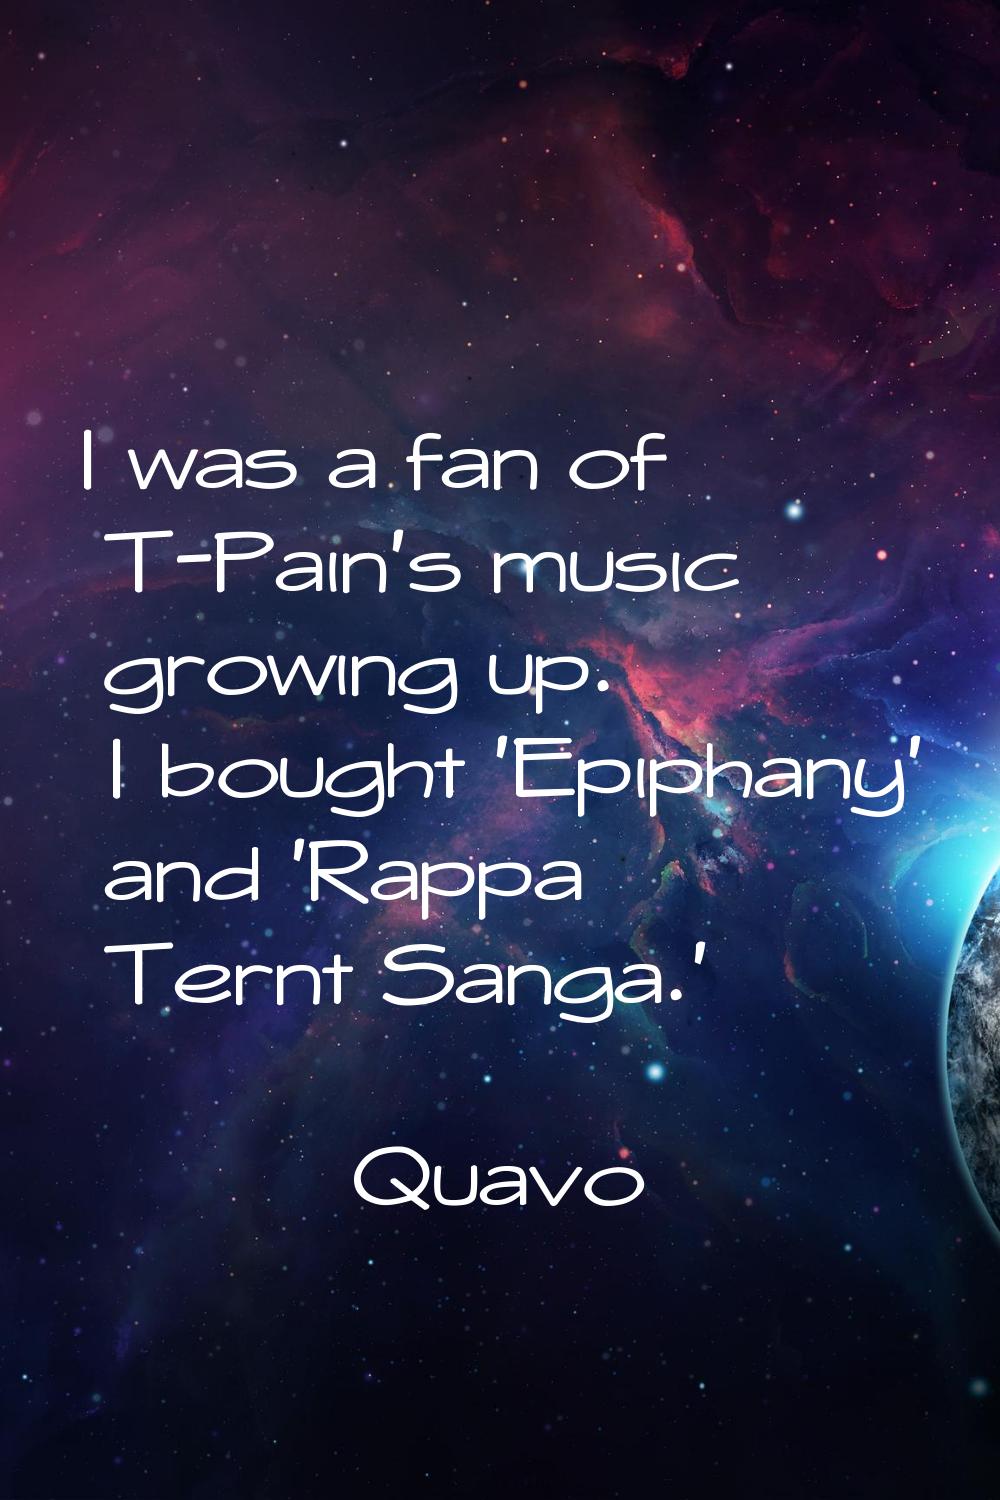 I was a fan of T-Pain's music growing up. I bought 'Epiphany' and 'Rappa Ternt Sanga.'